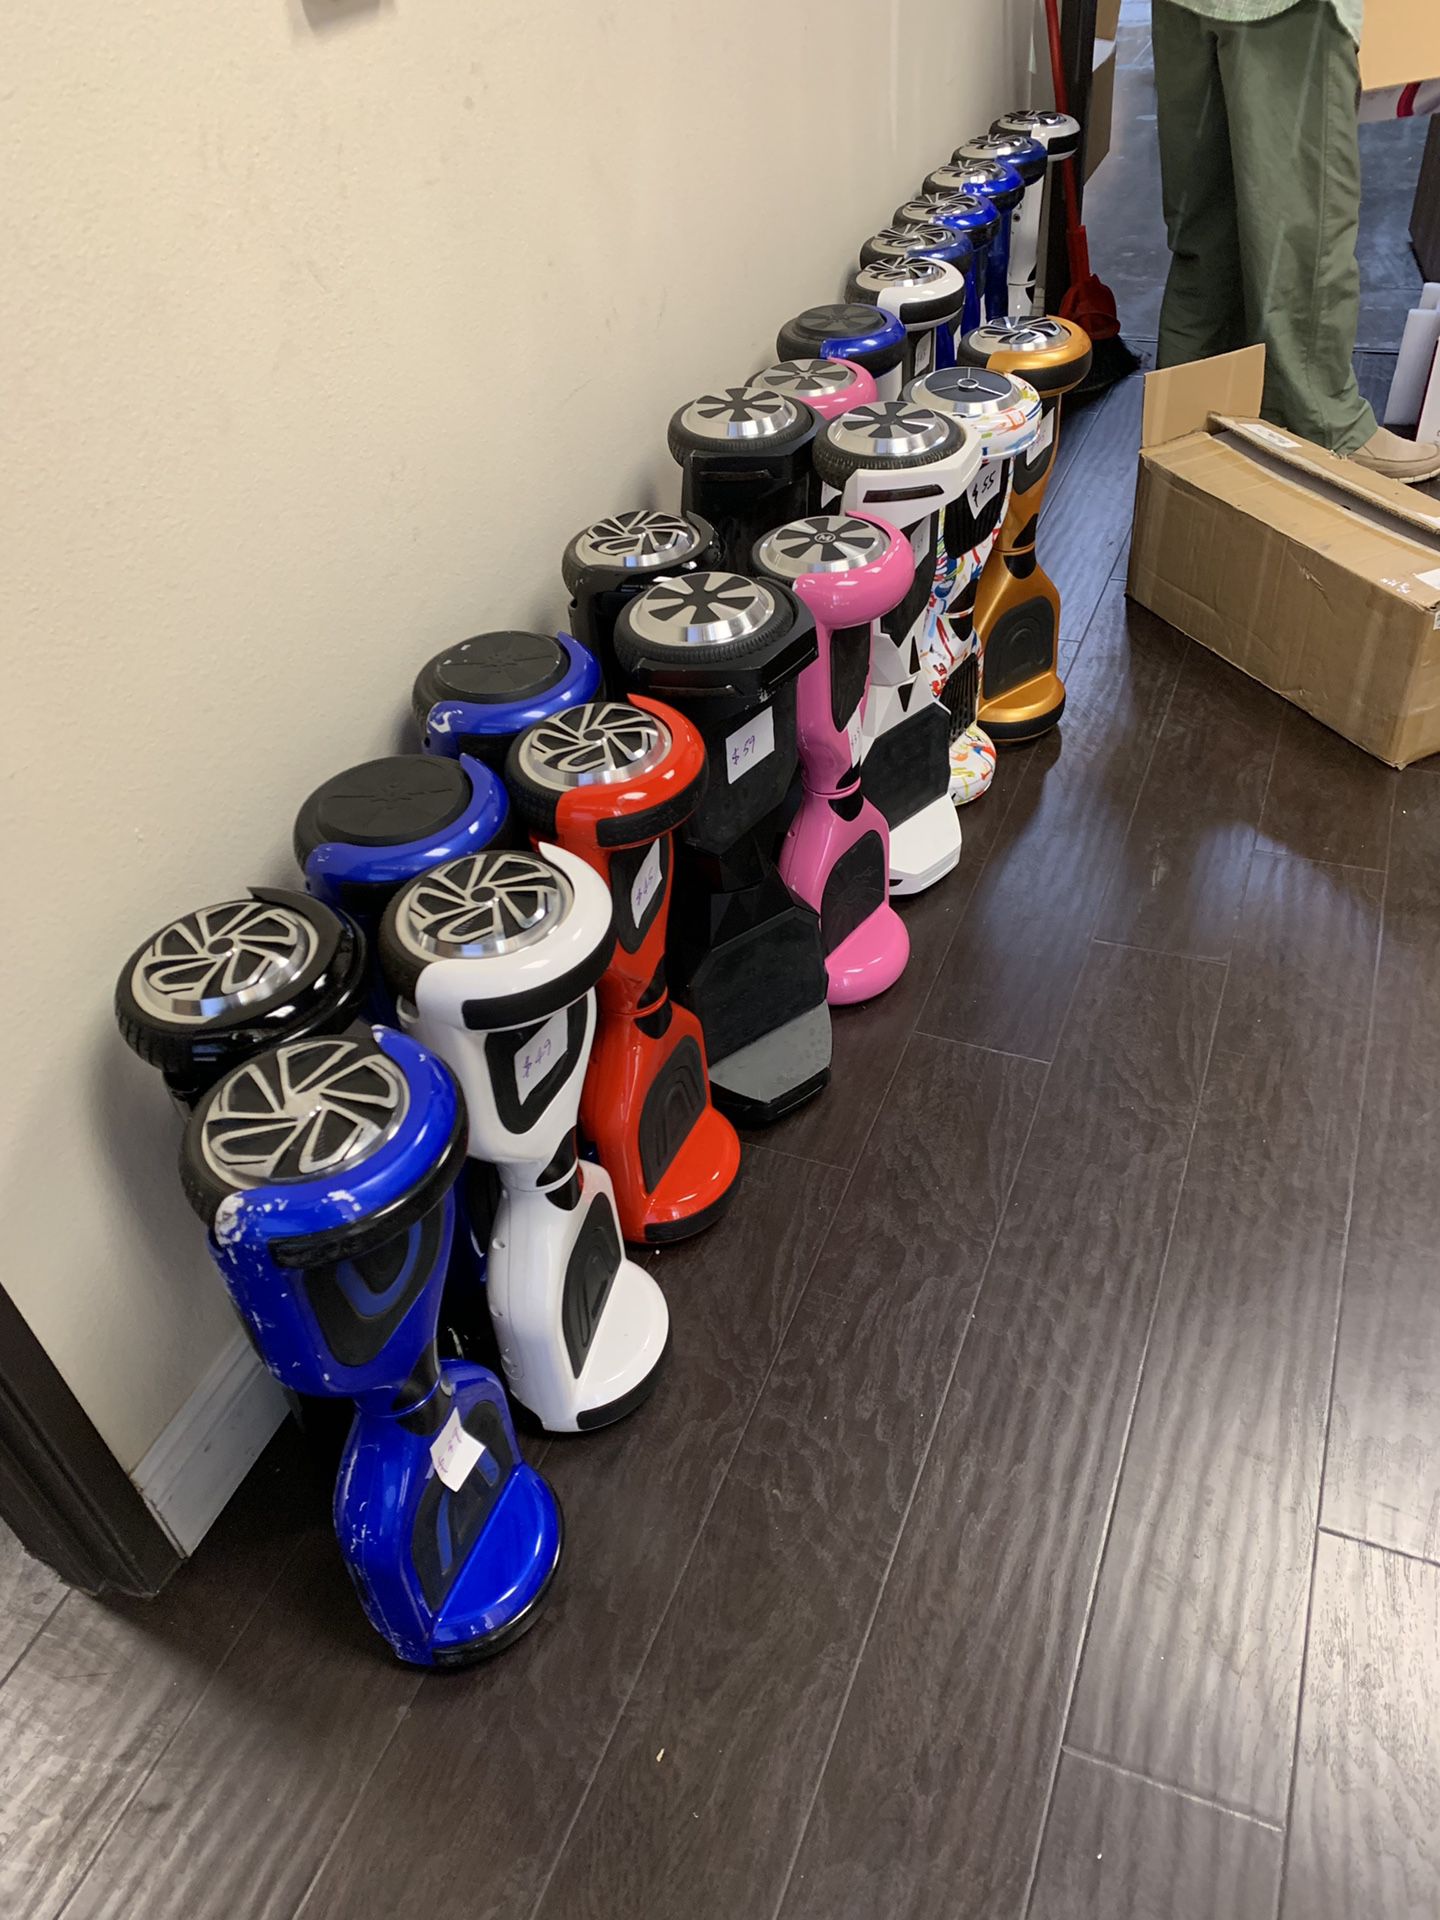 Cheap hoverboards with led lights perfect working condition factory clearance sale price